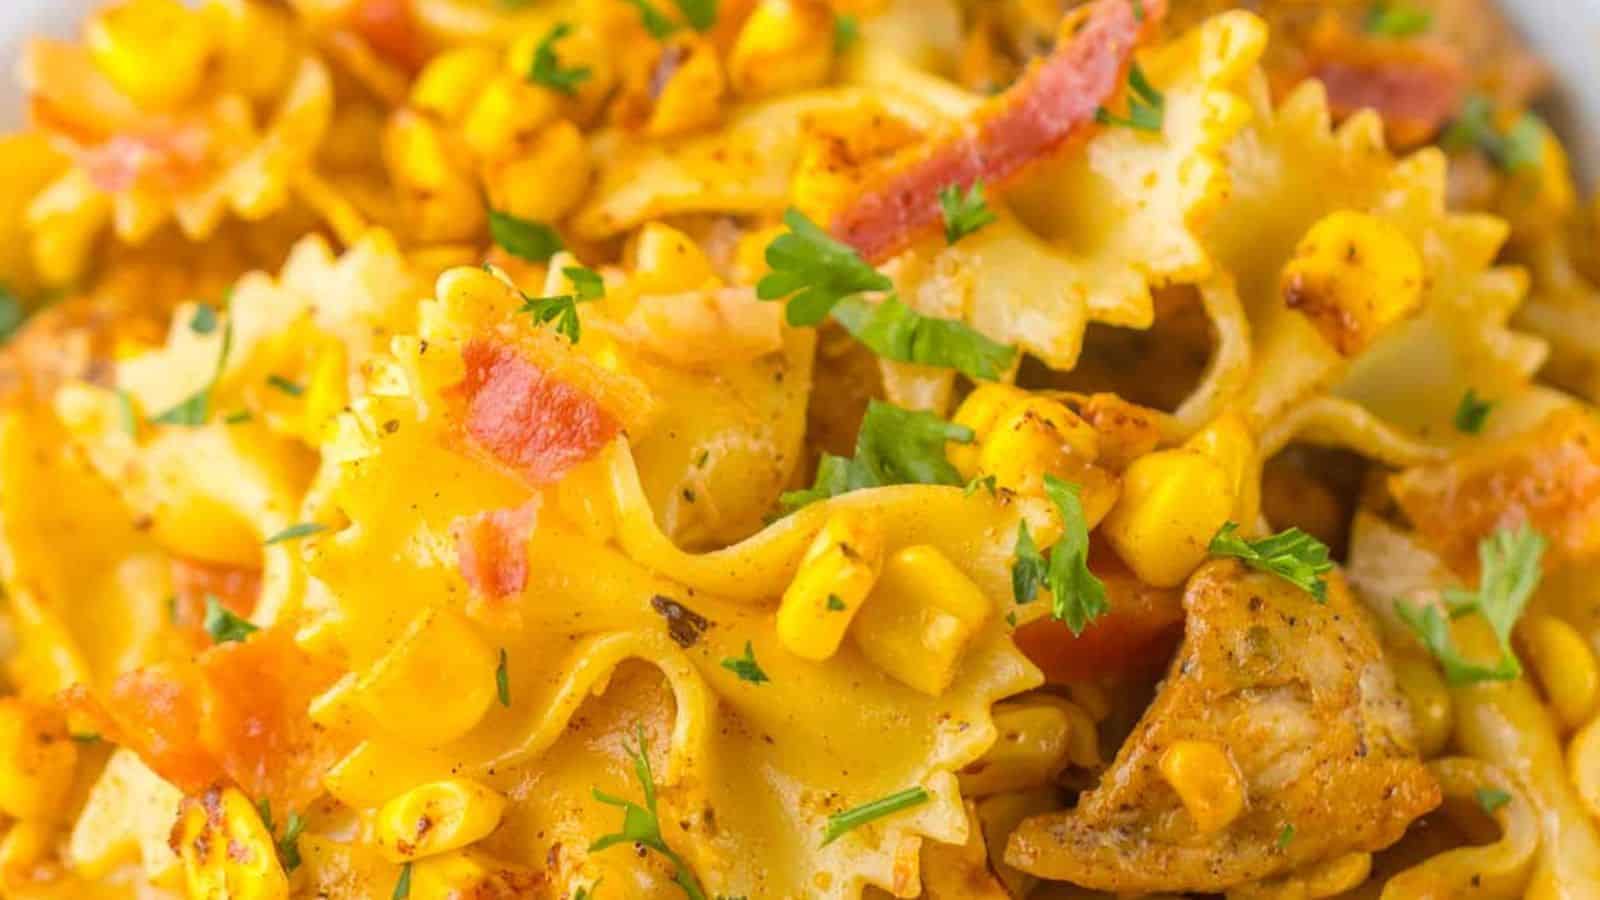 Close-up of a pasta dish with corn, bacon, and herbs, seasoned with a creamy yellow sauce.